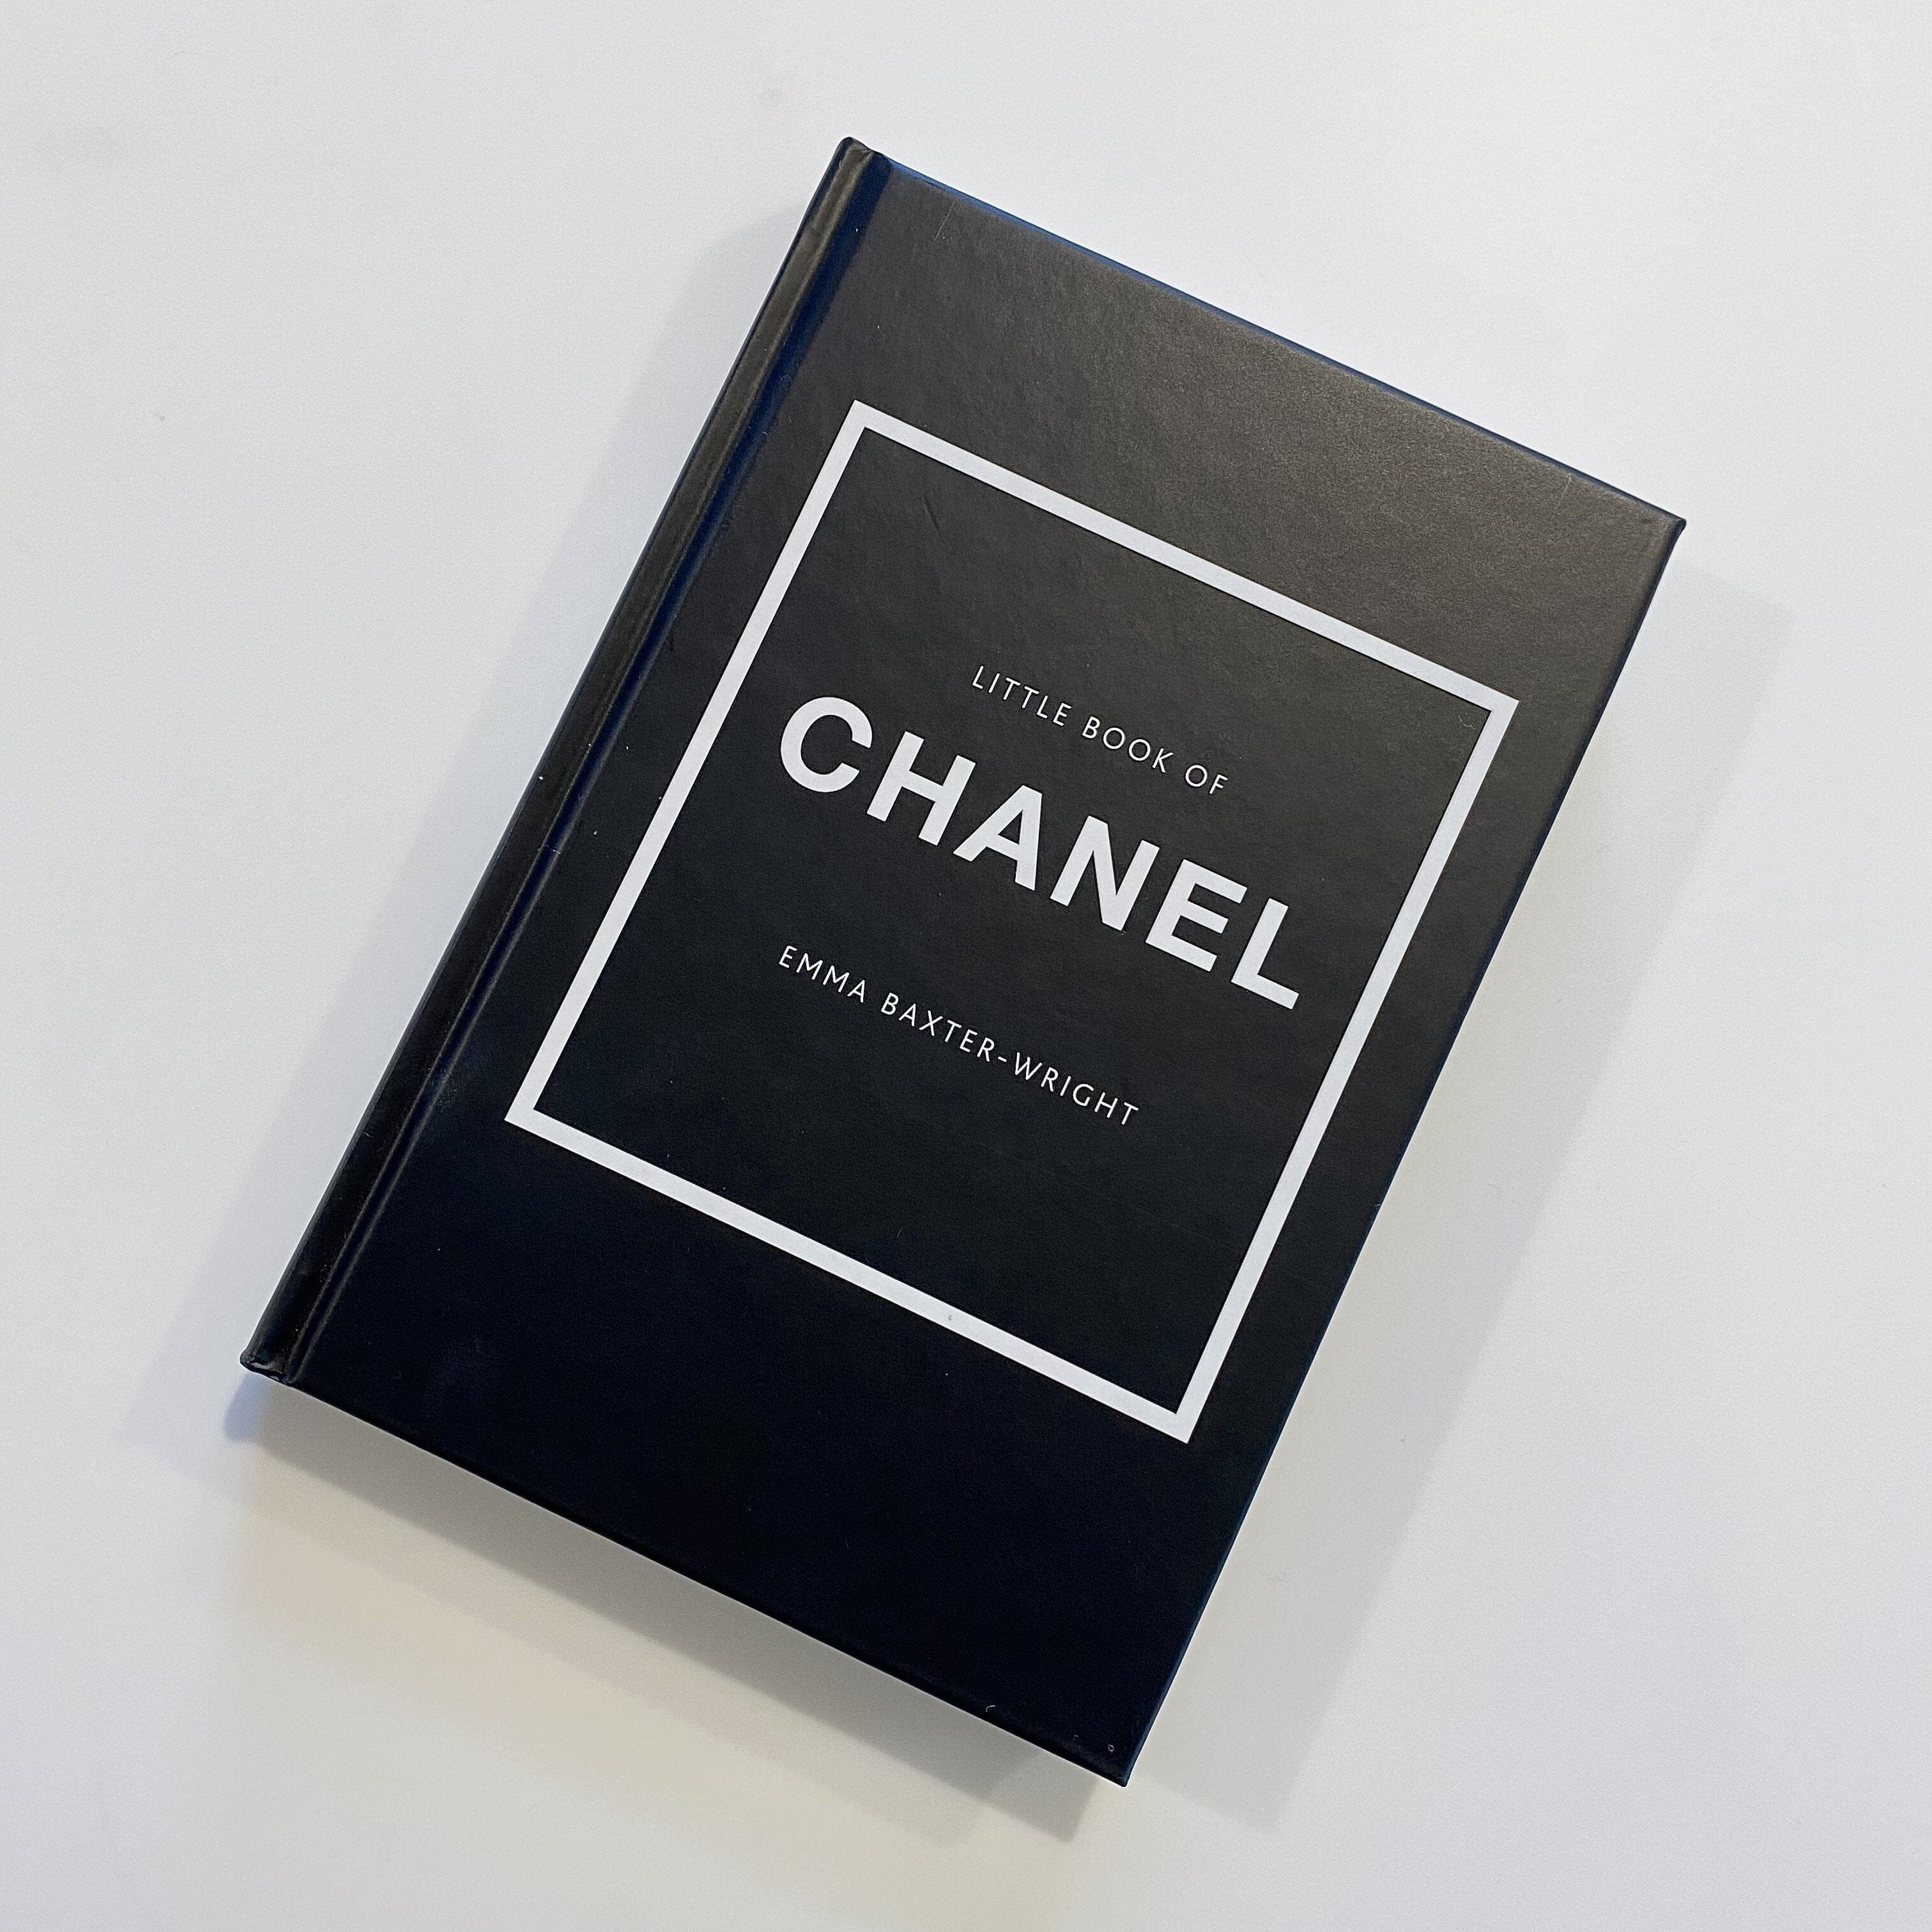 Chanel: Collections and Creations, by Bott